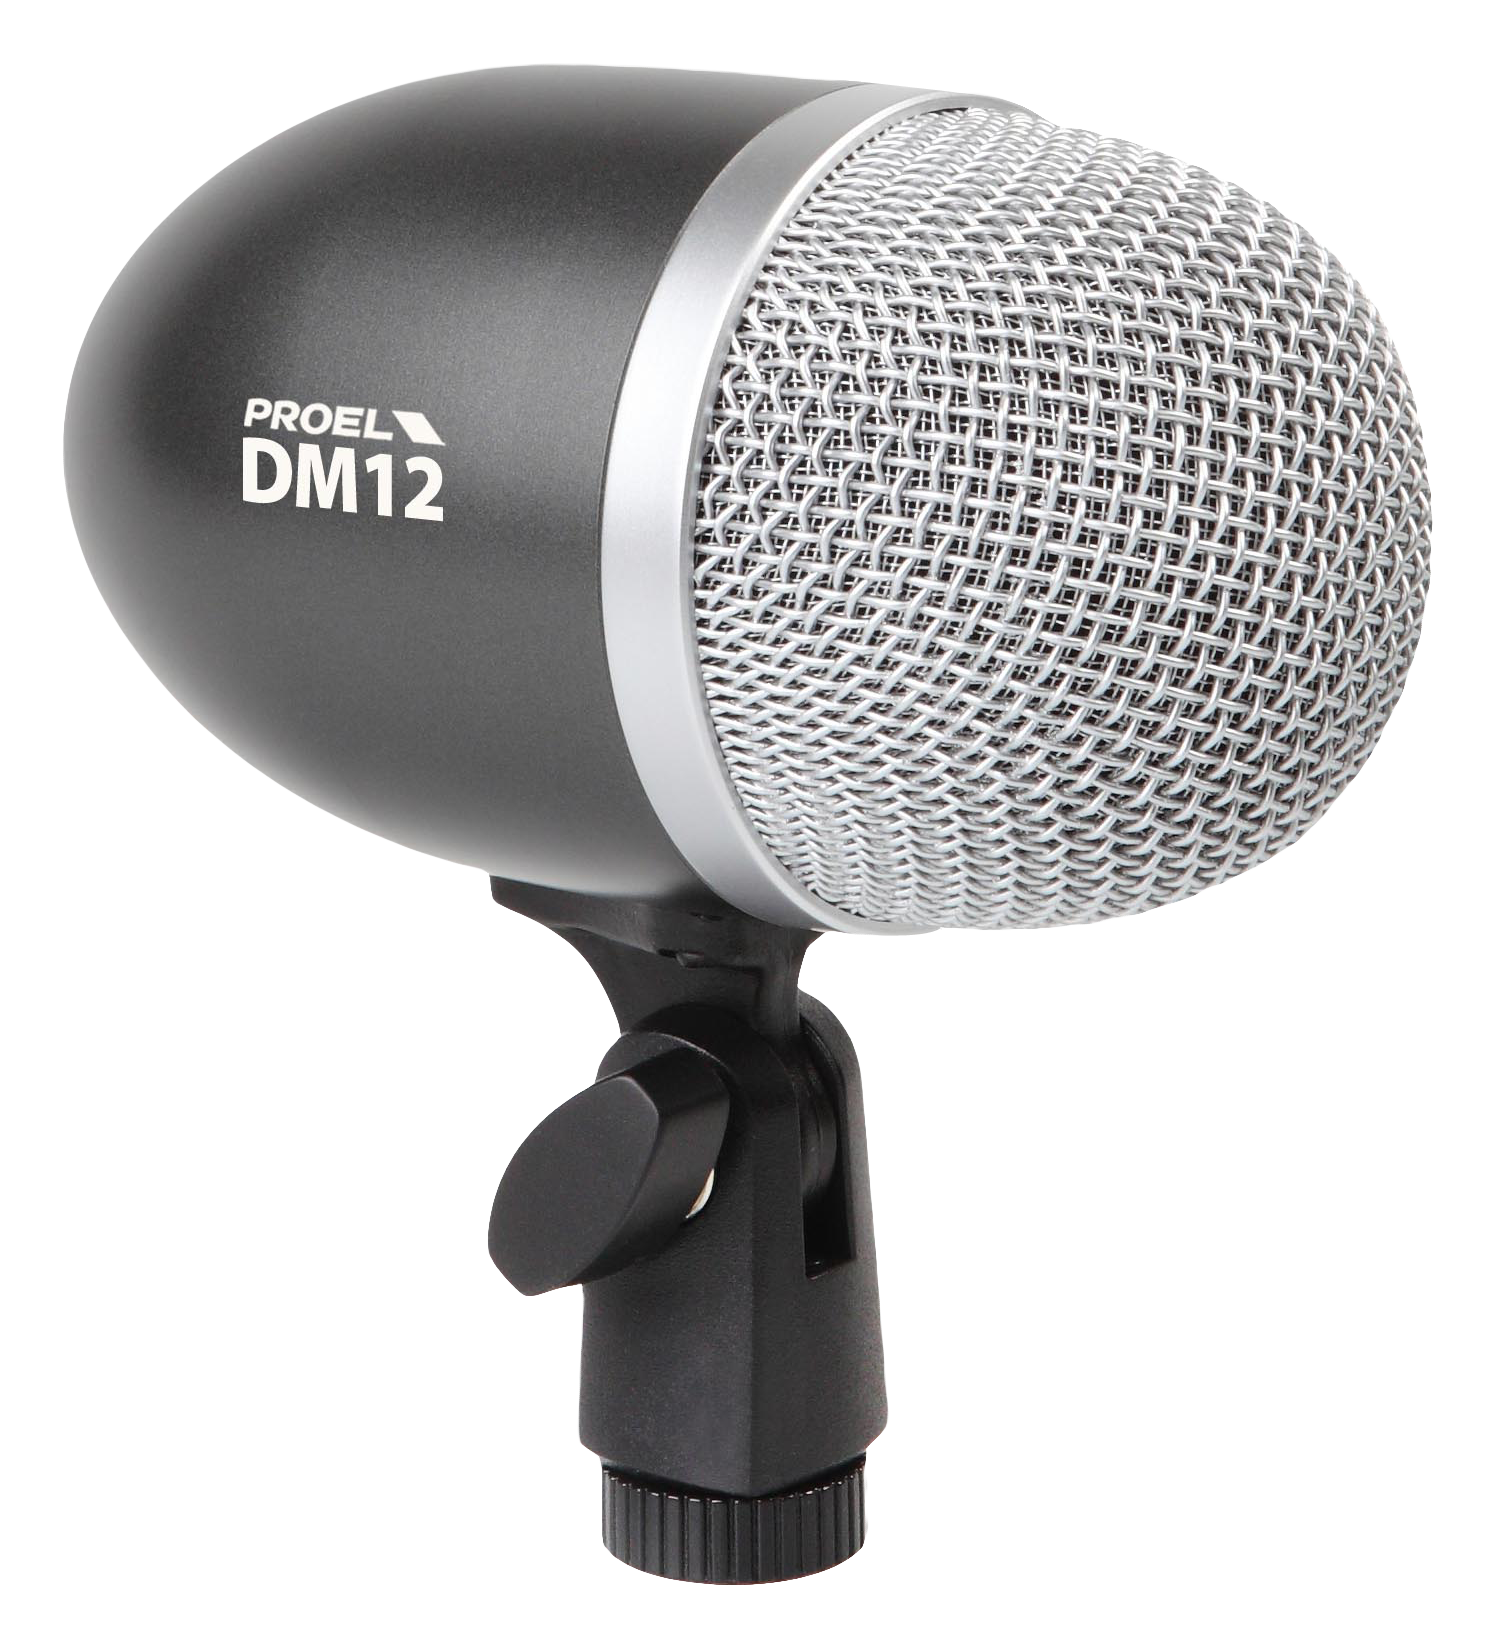 microphone clipart podcast microphone